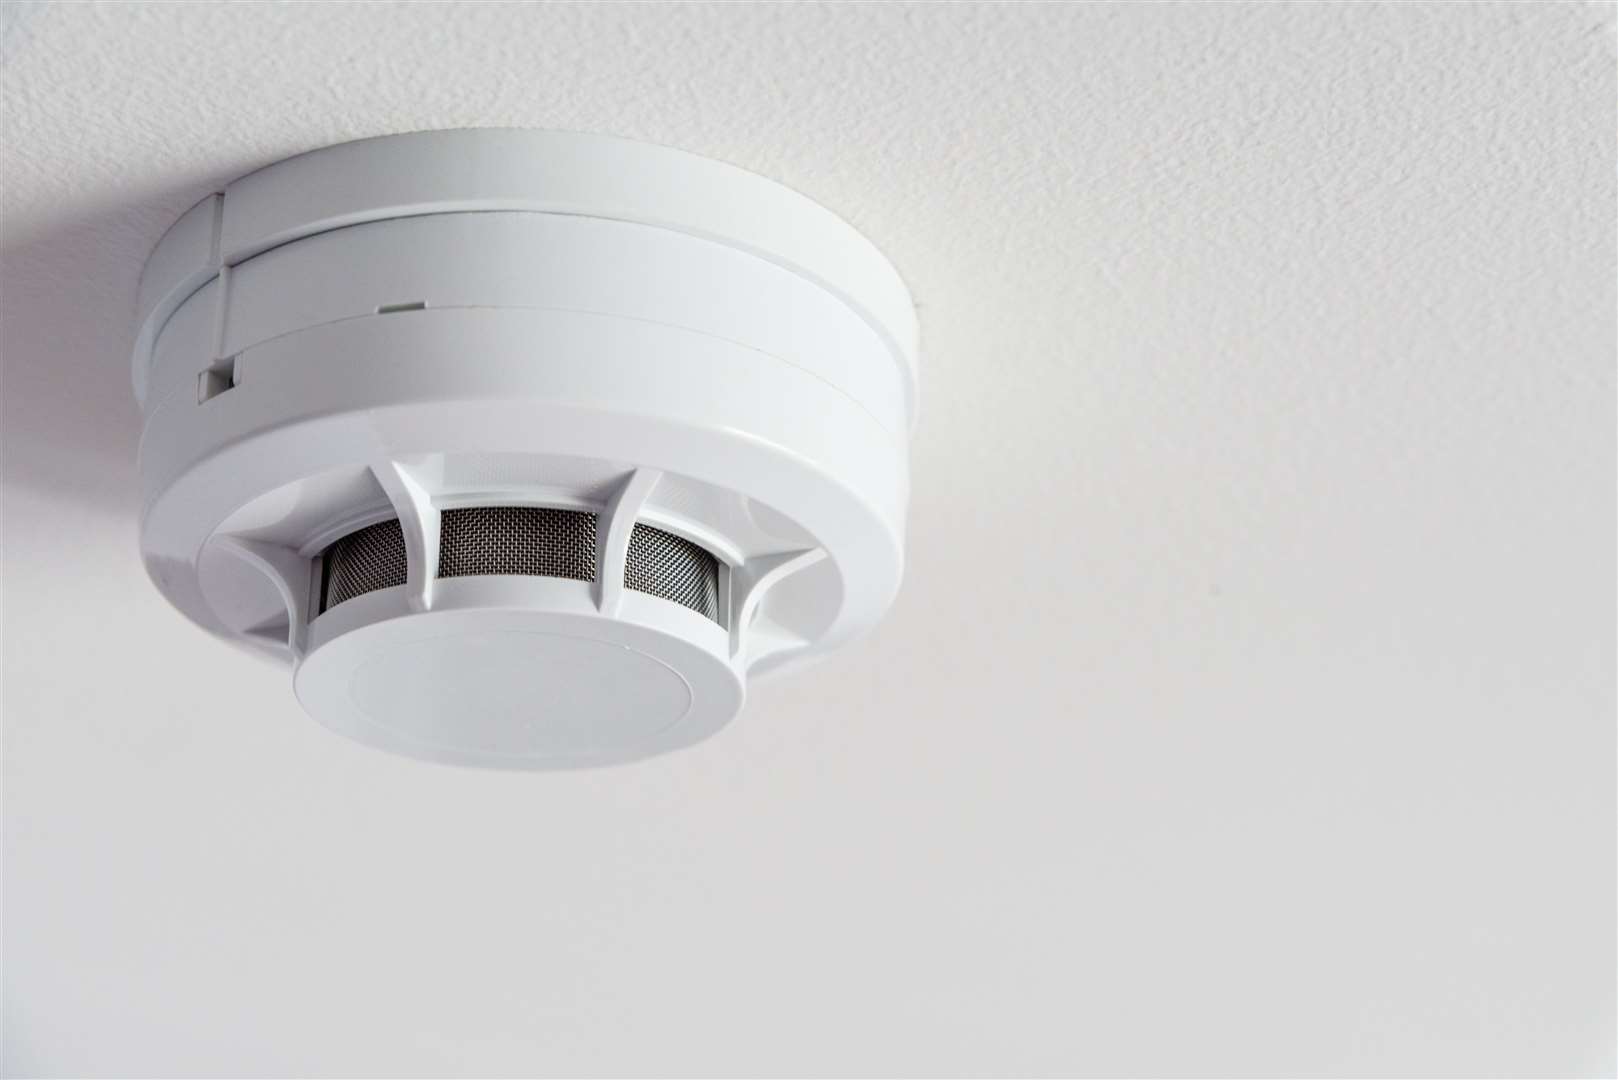 Moray Council will be upgrading smoke, heat and carbon monoxide alarms in council homes to meet new legal safety standards.